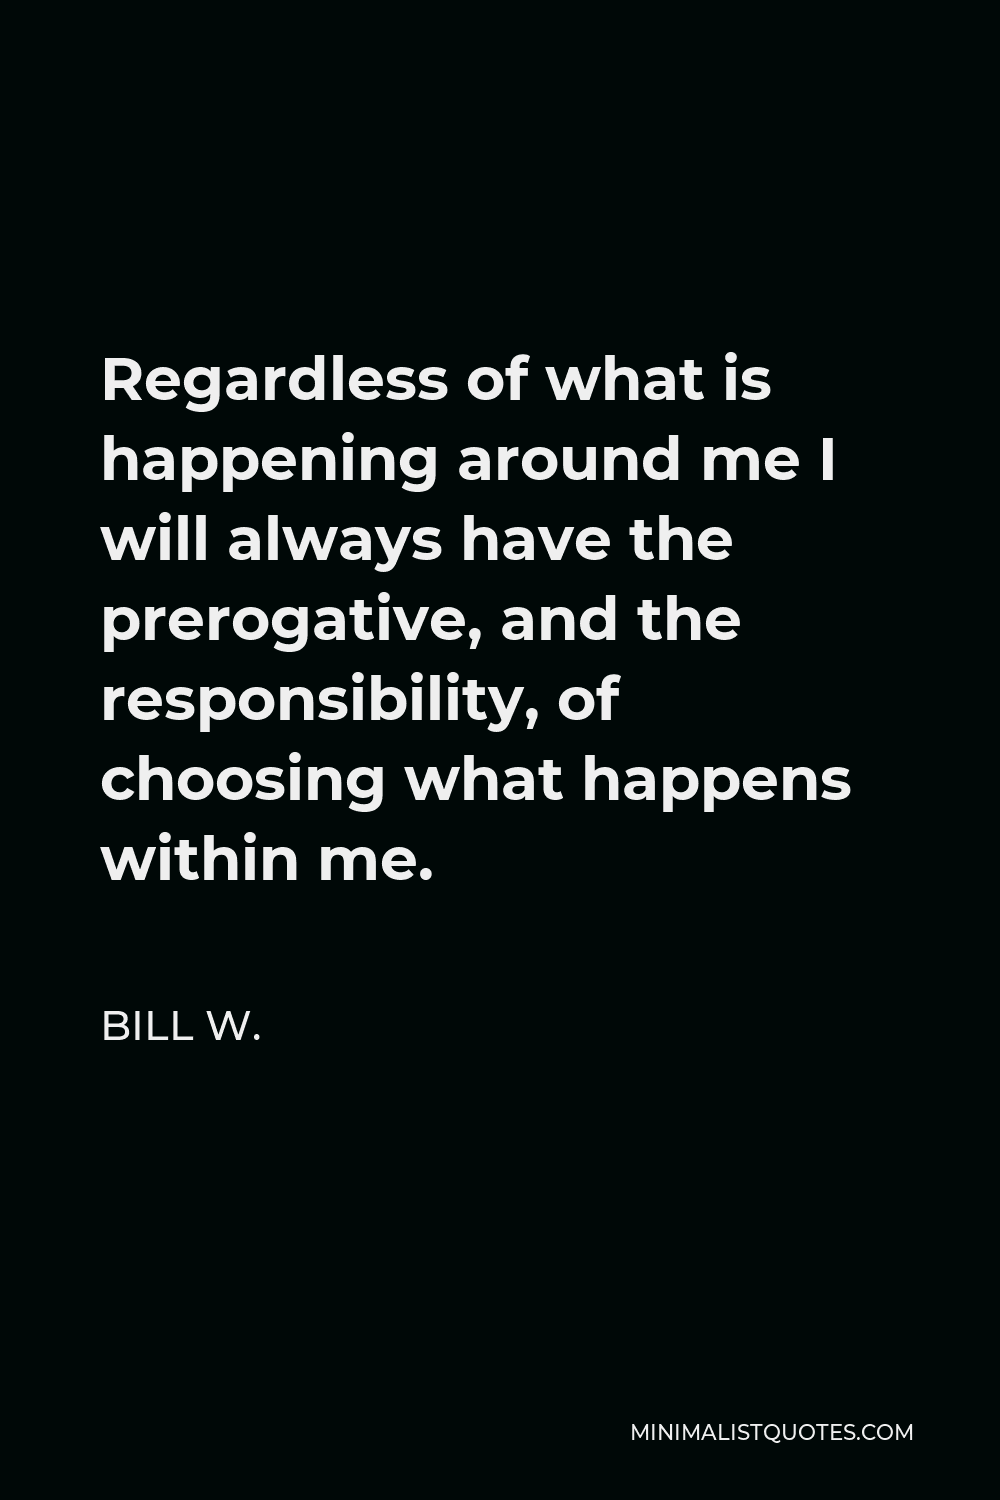 Bill W. Quote - Regardless of what is happening around me I will always have the prerogative, and the responsibility, of choosing what happens within me.